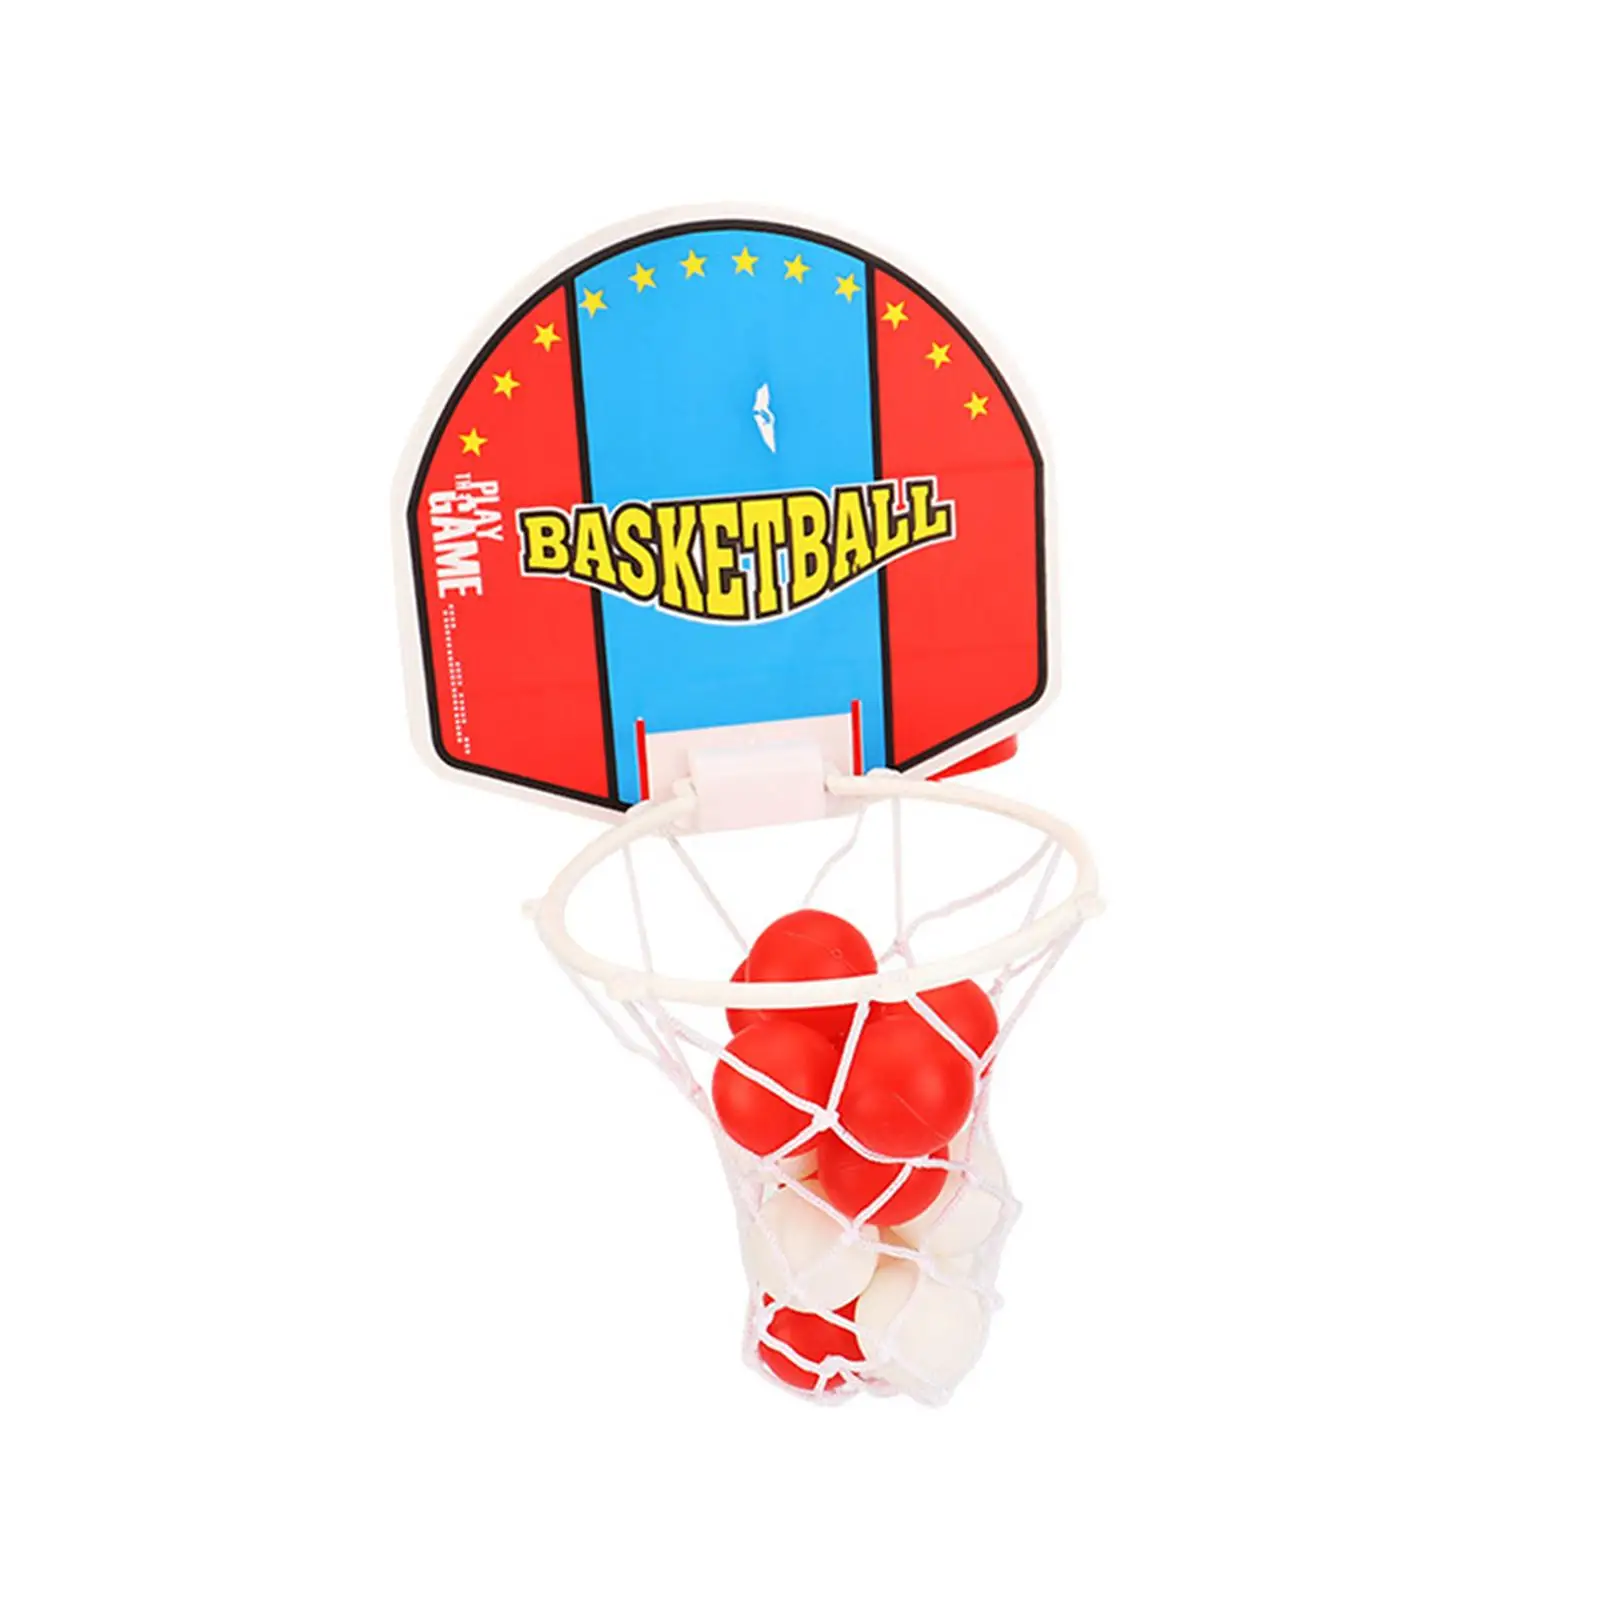 Head Hoop Basketball Indoor Educational Outdoor Interactive Basketball Toss Game for Birthday Party Contest Gathering Classroom